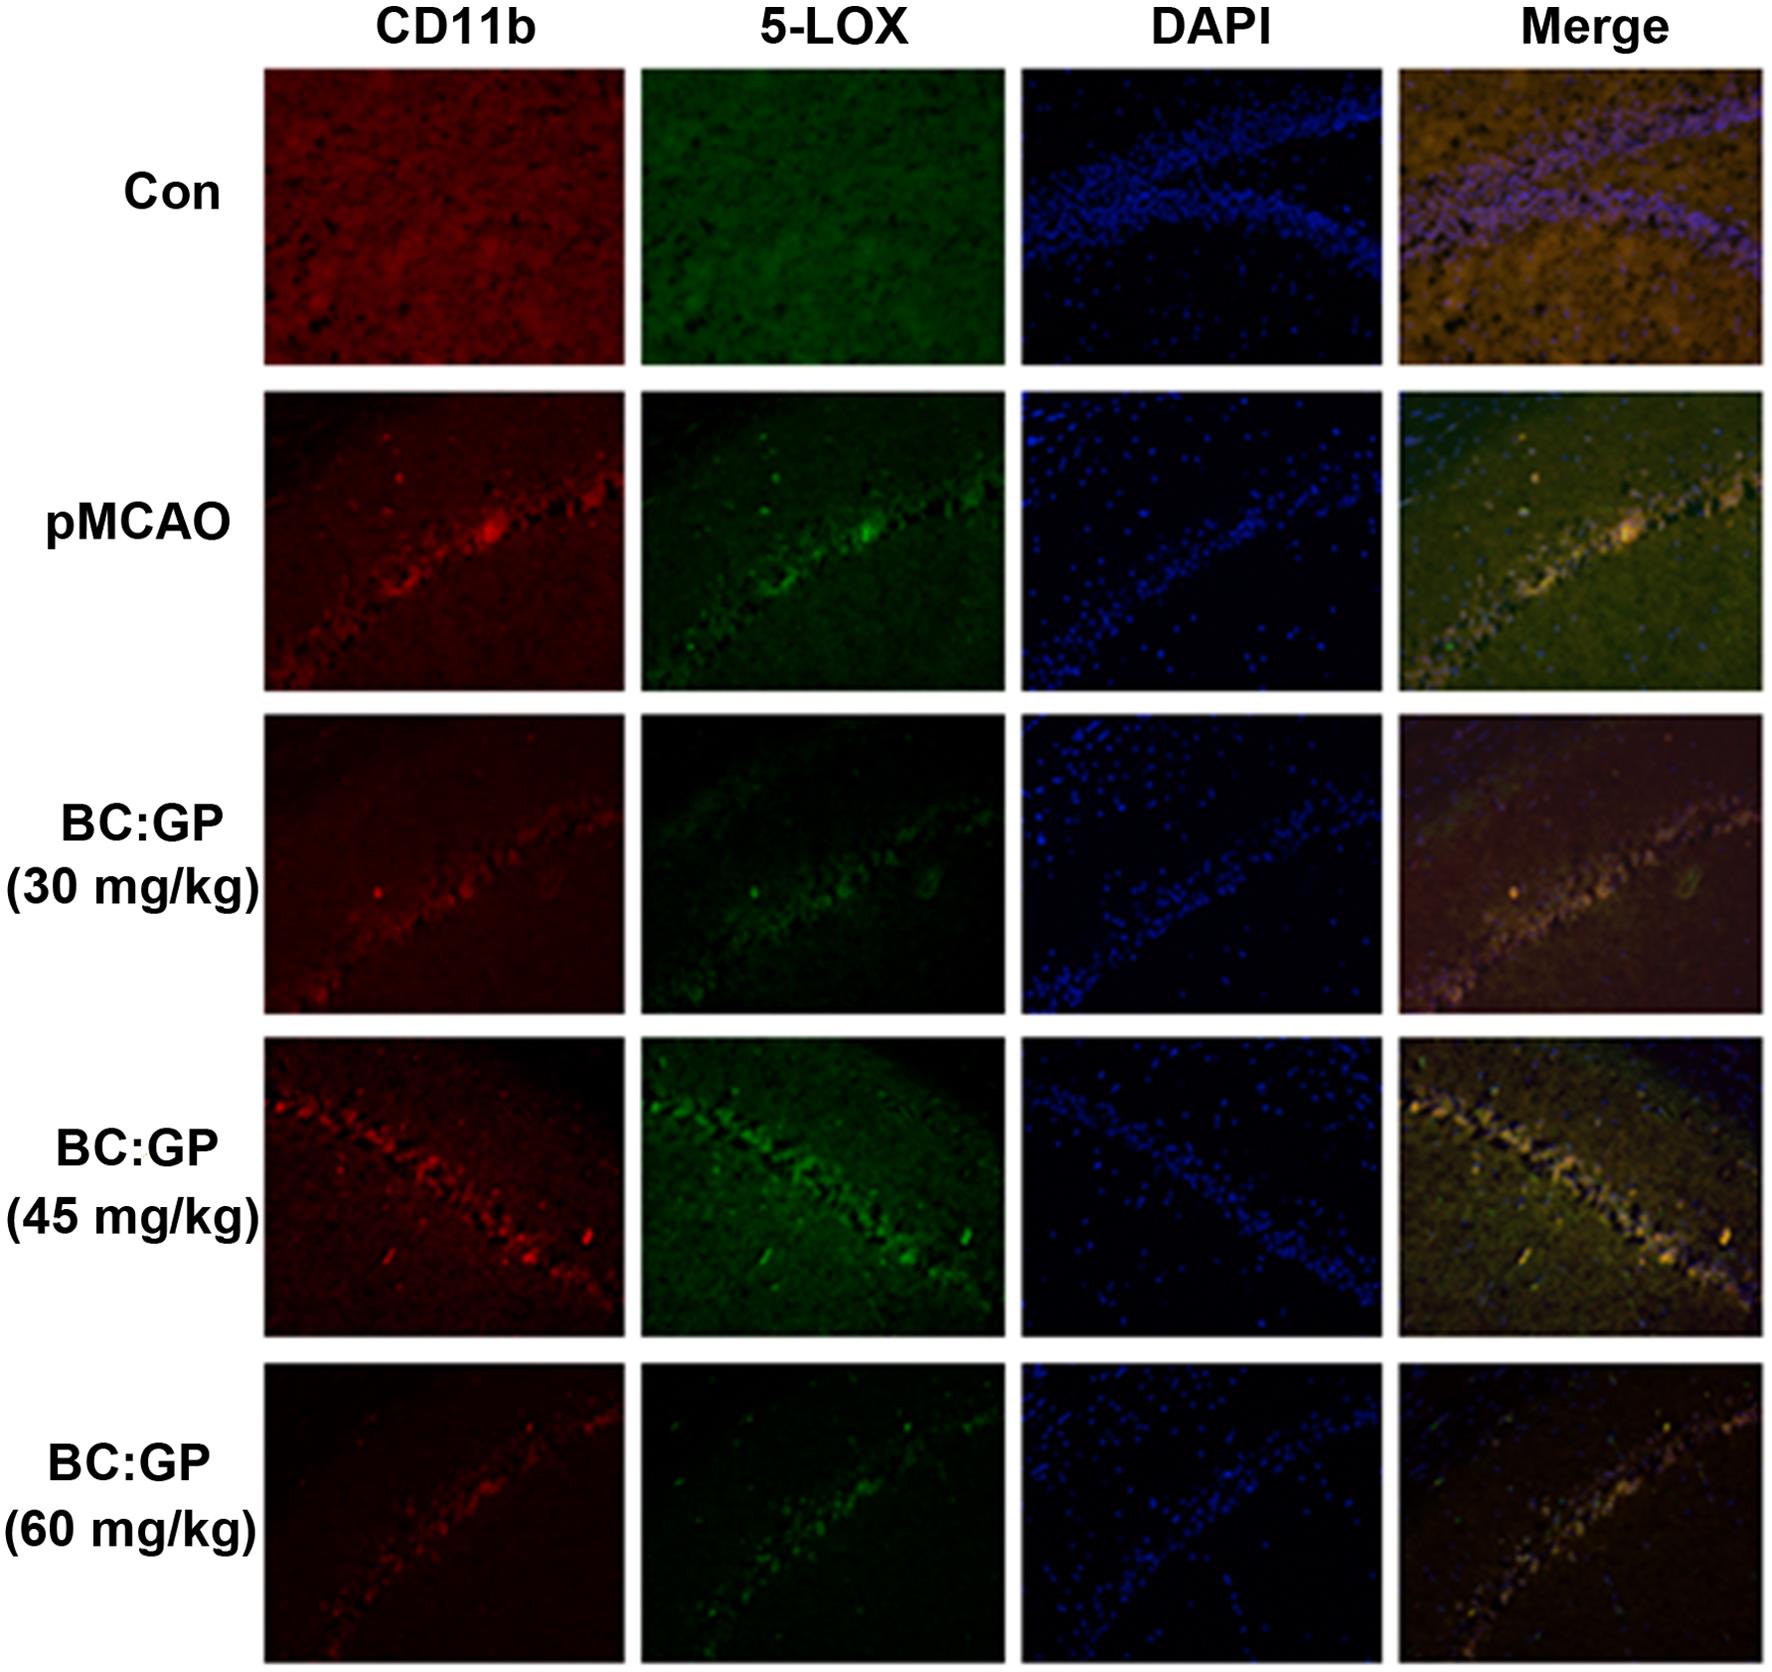 Effect of the BC/GP combination (7:3) on microglia and 5-LOX expression in the brain tissue of pMCAO rats (21 d).